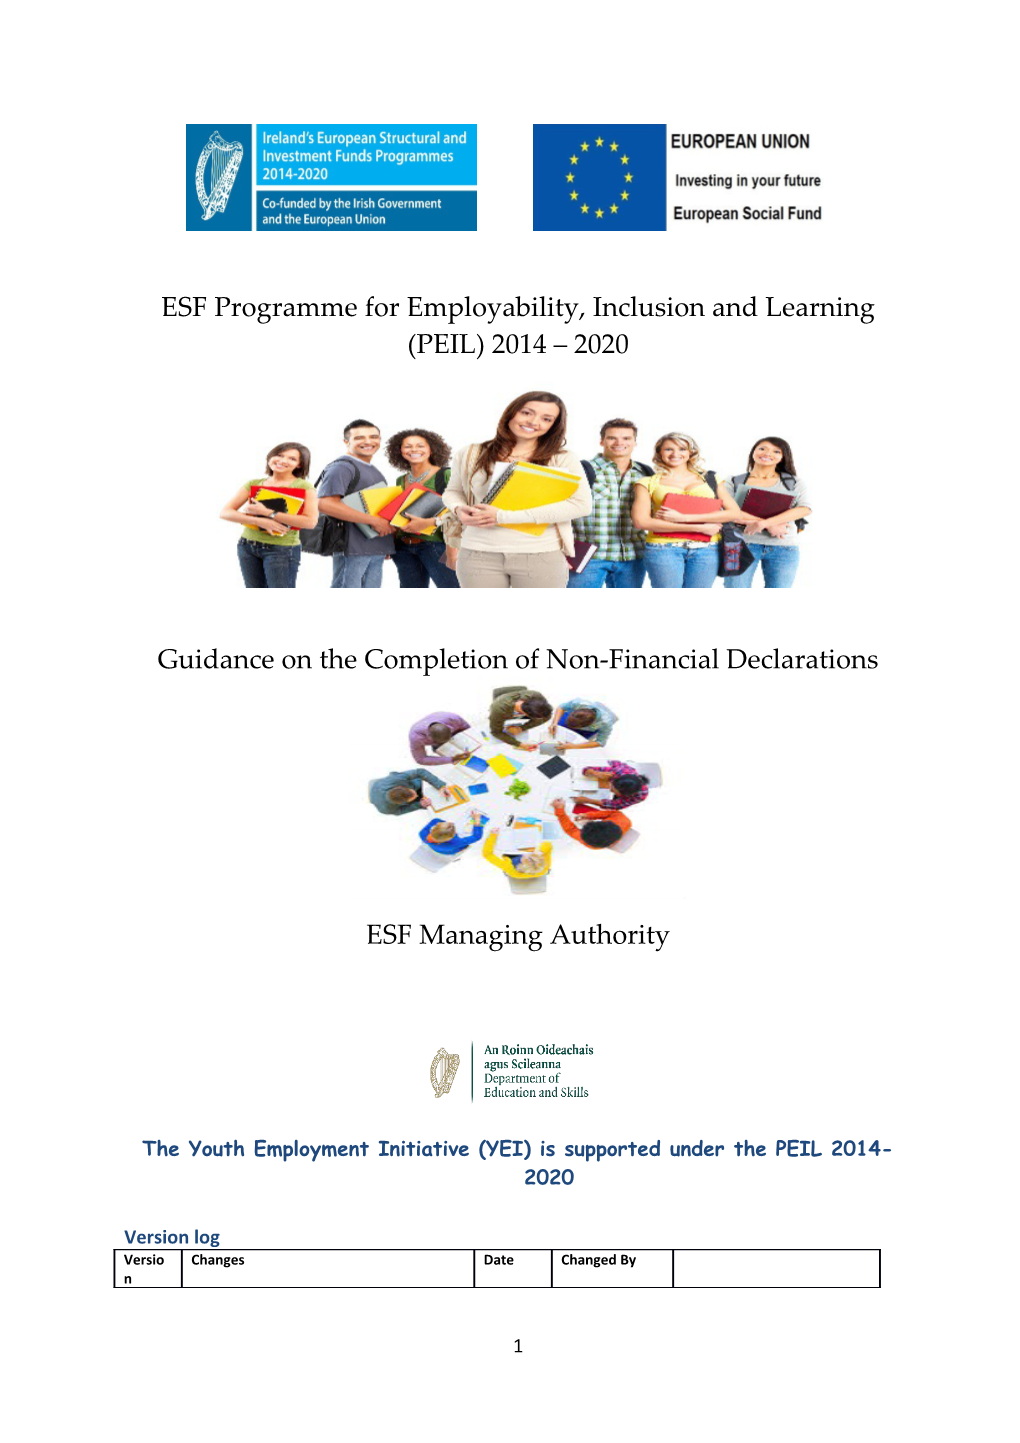 ESF Programme for Employability, Inclusion and Learning (PEIL) 2014 2020